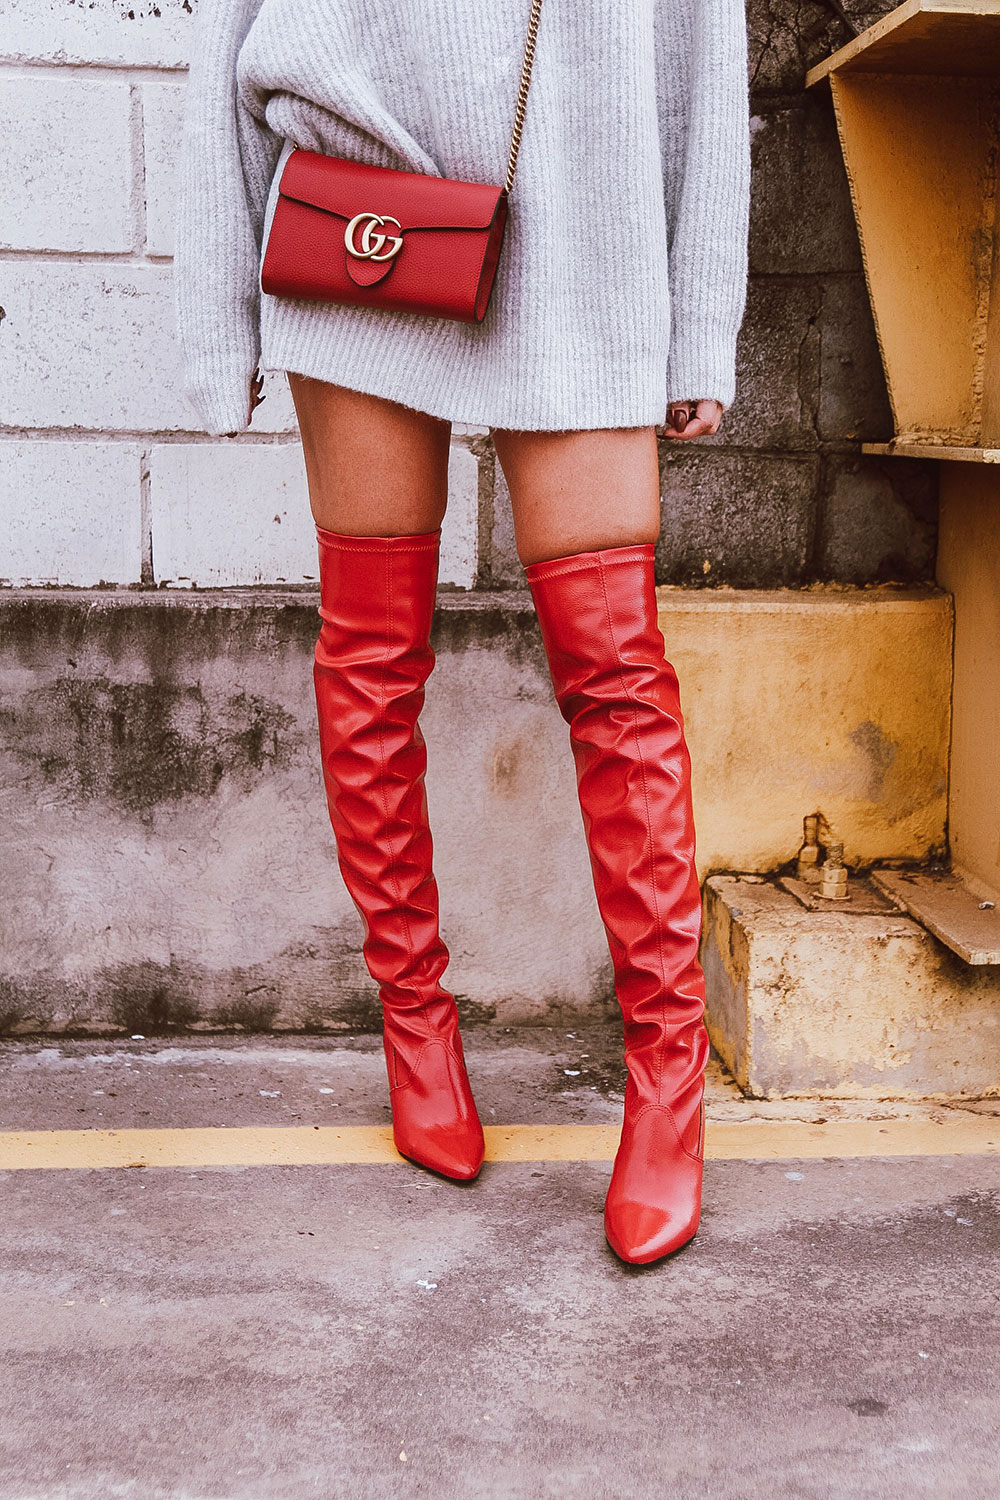 long red boots outfit